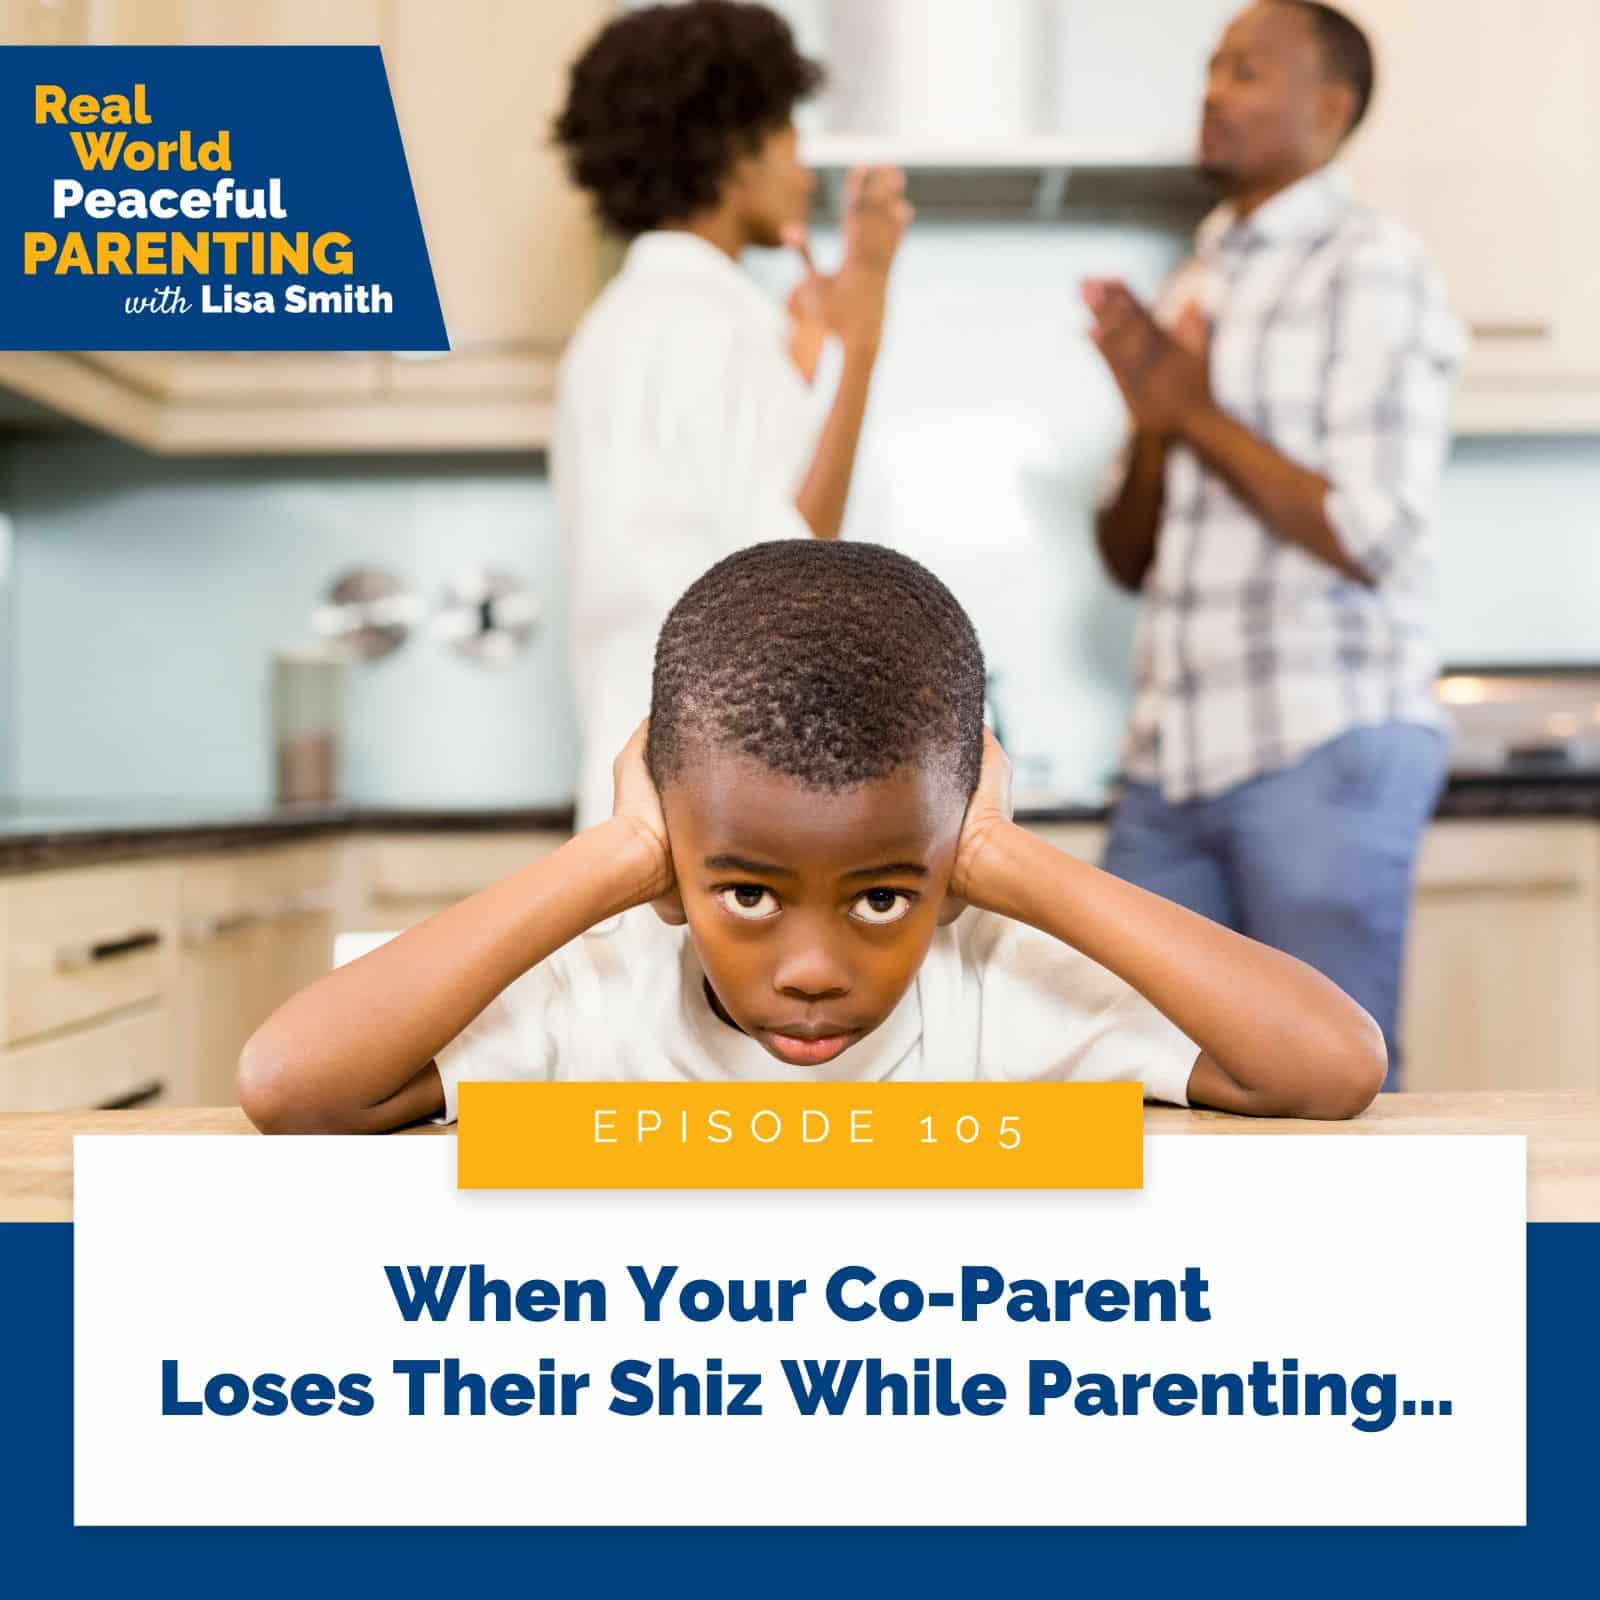 Real World Peaceful Parenting with Lisa Smith | When Your Co-Parent Loses Their Shiz While Parenting…